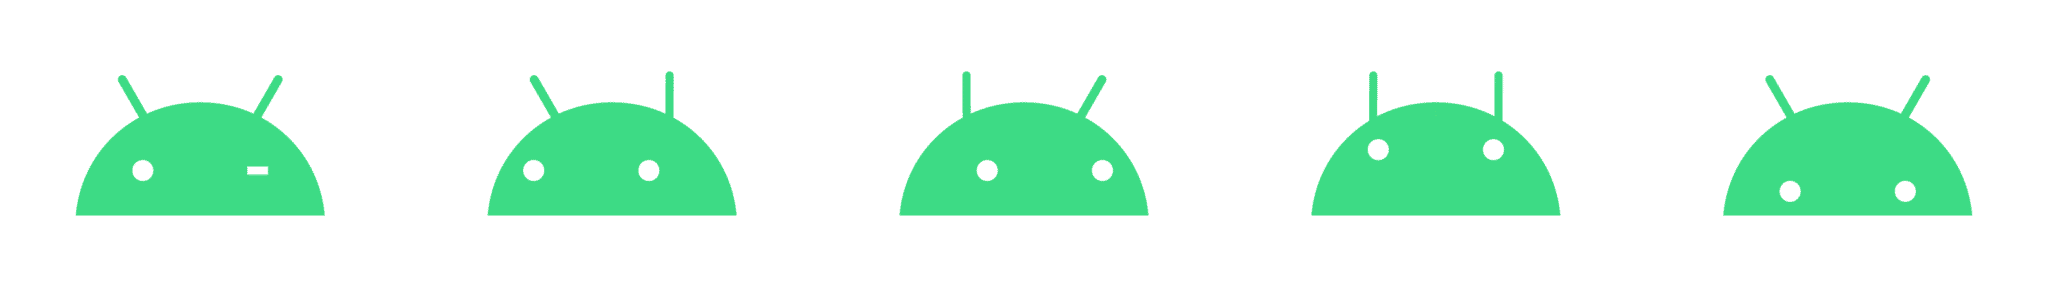 New Logo and Identity for Android by Huge 5